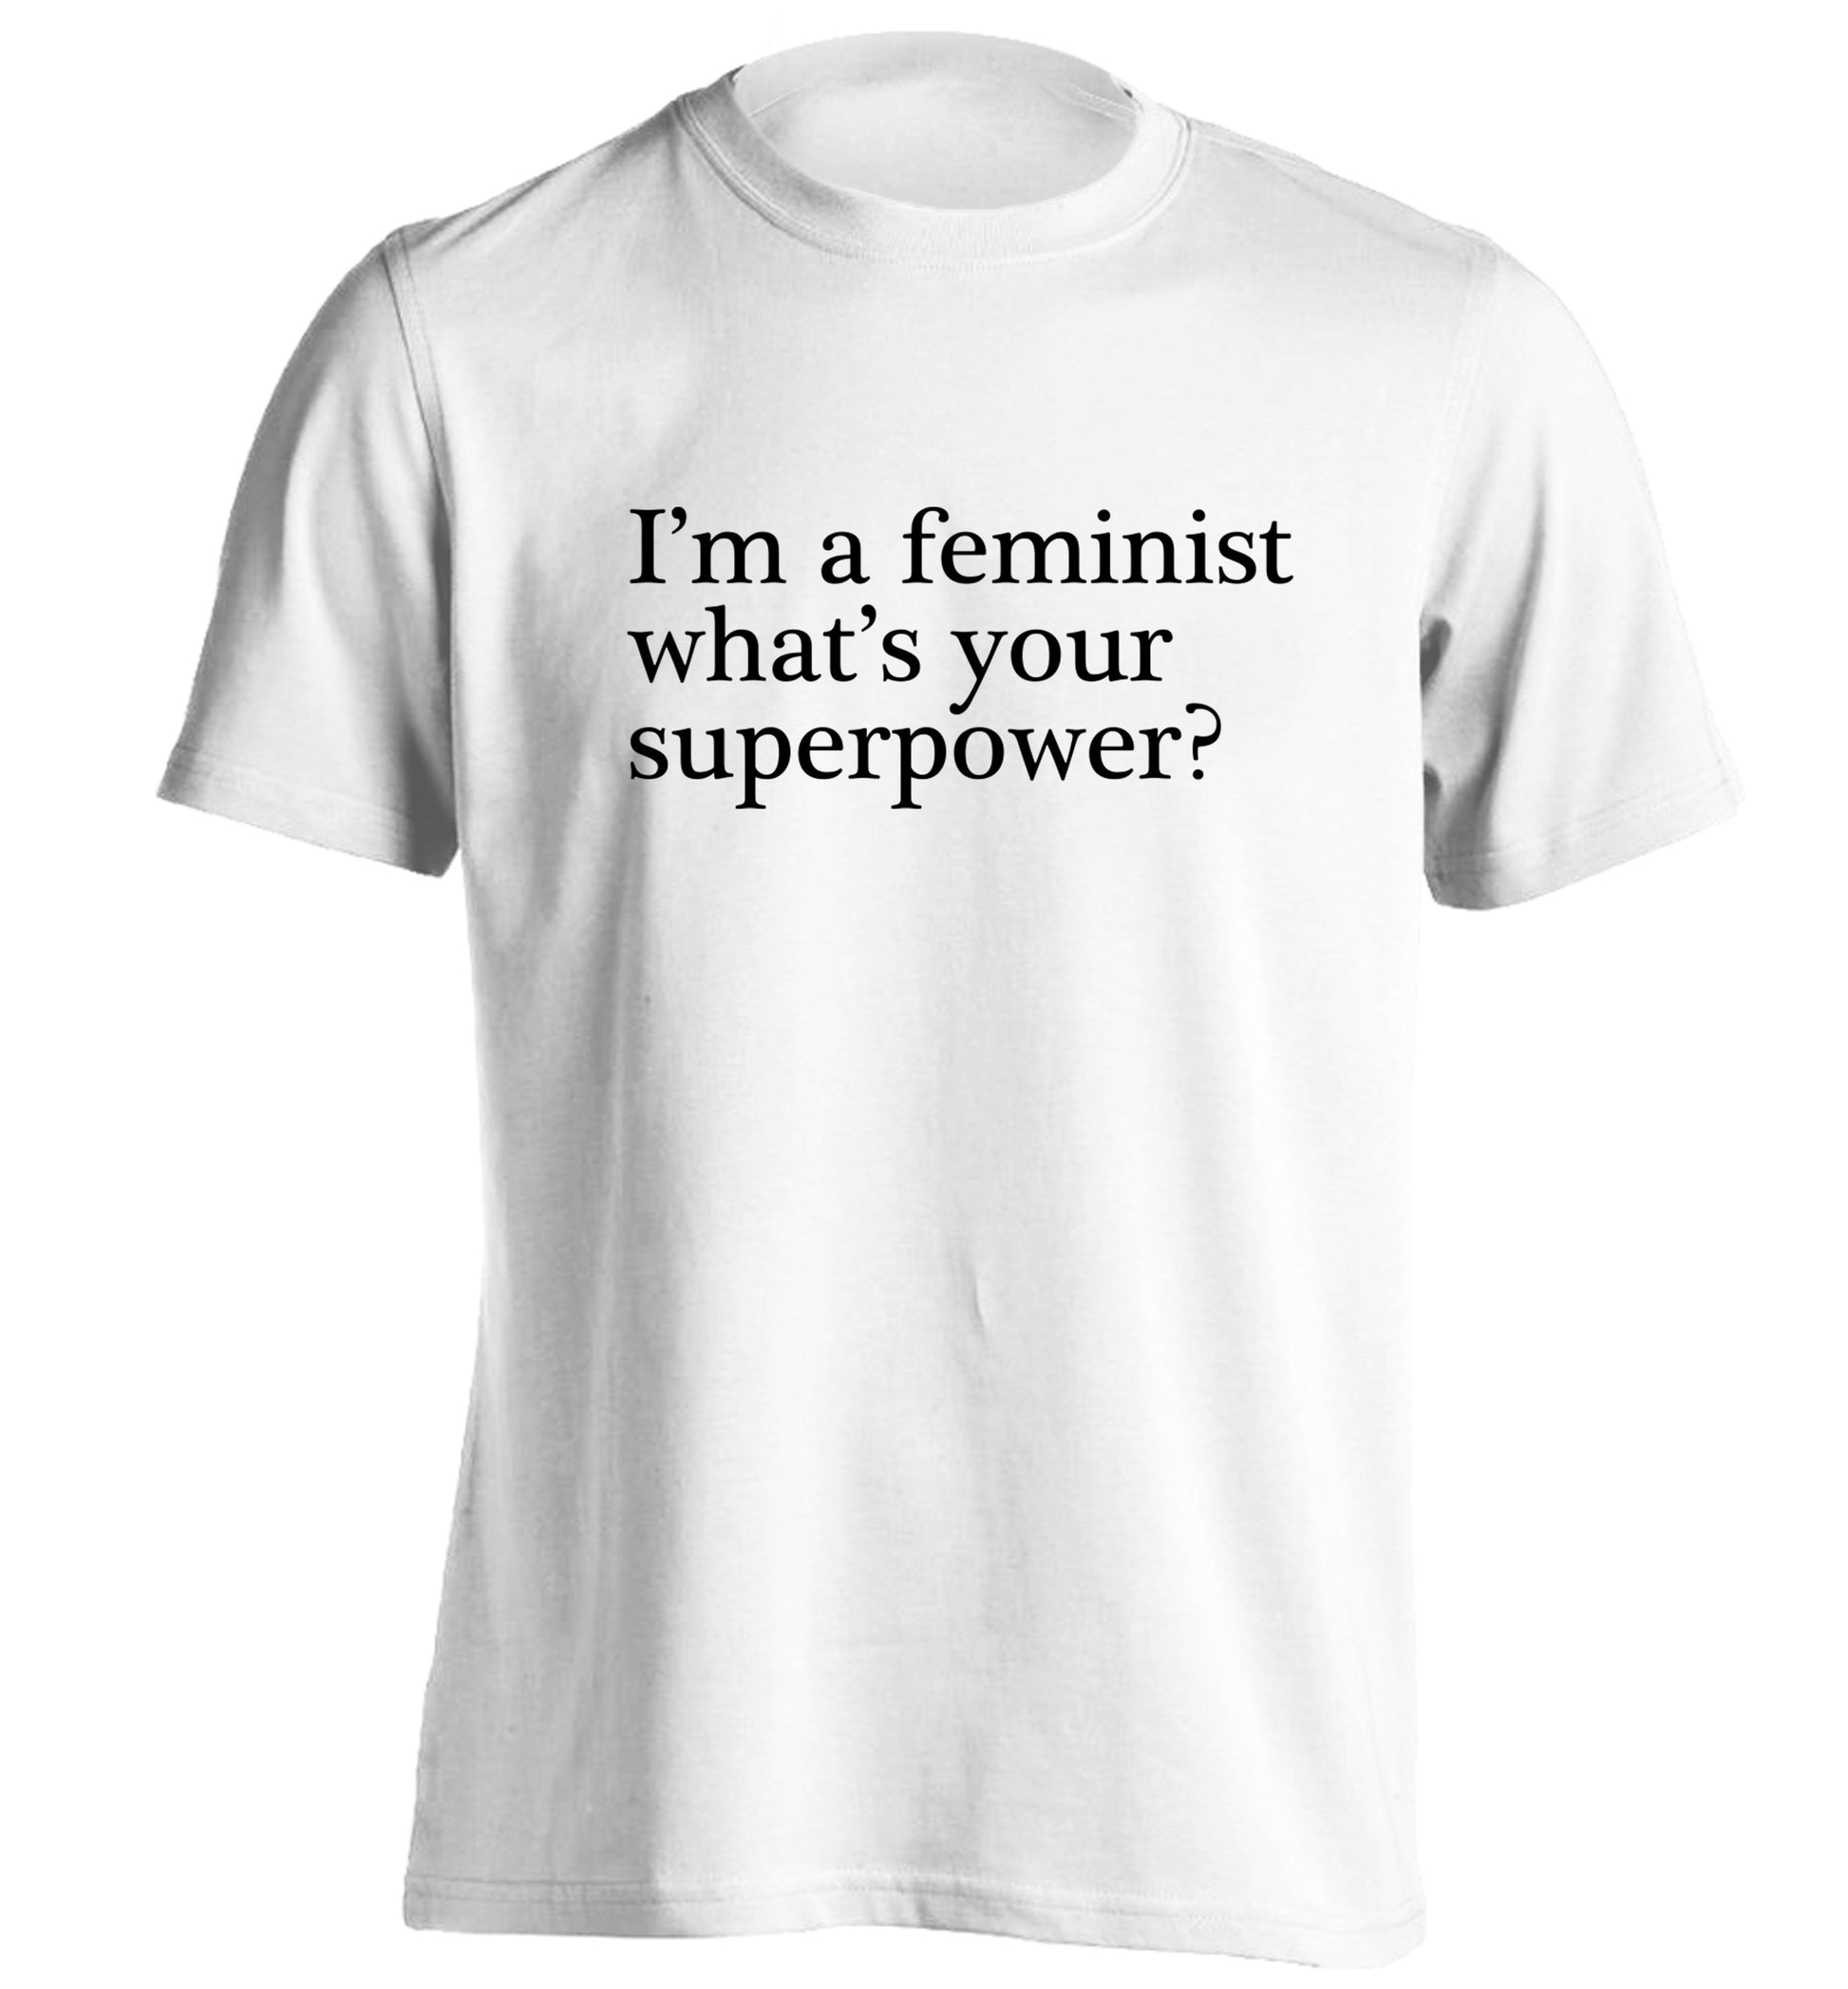 I'm a feminist what's your superpower? adults unisex white Tshirt 2XL